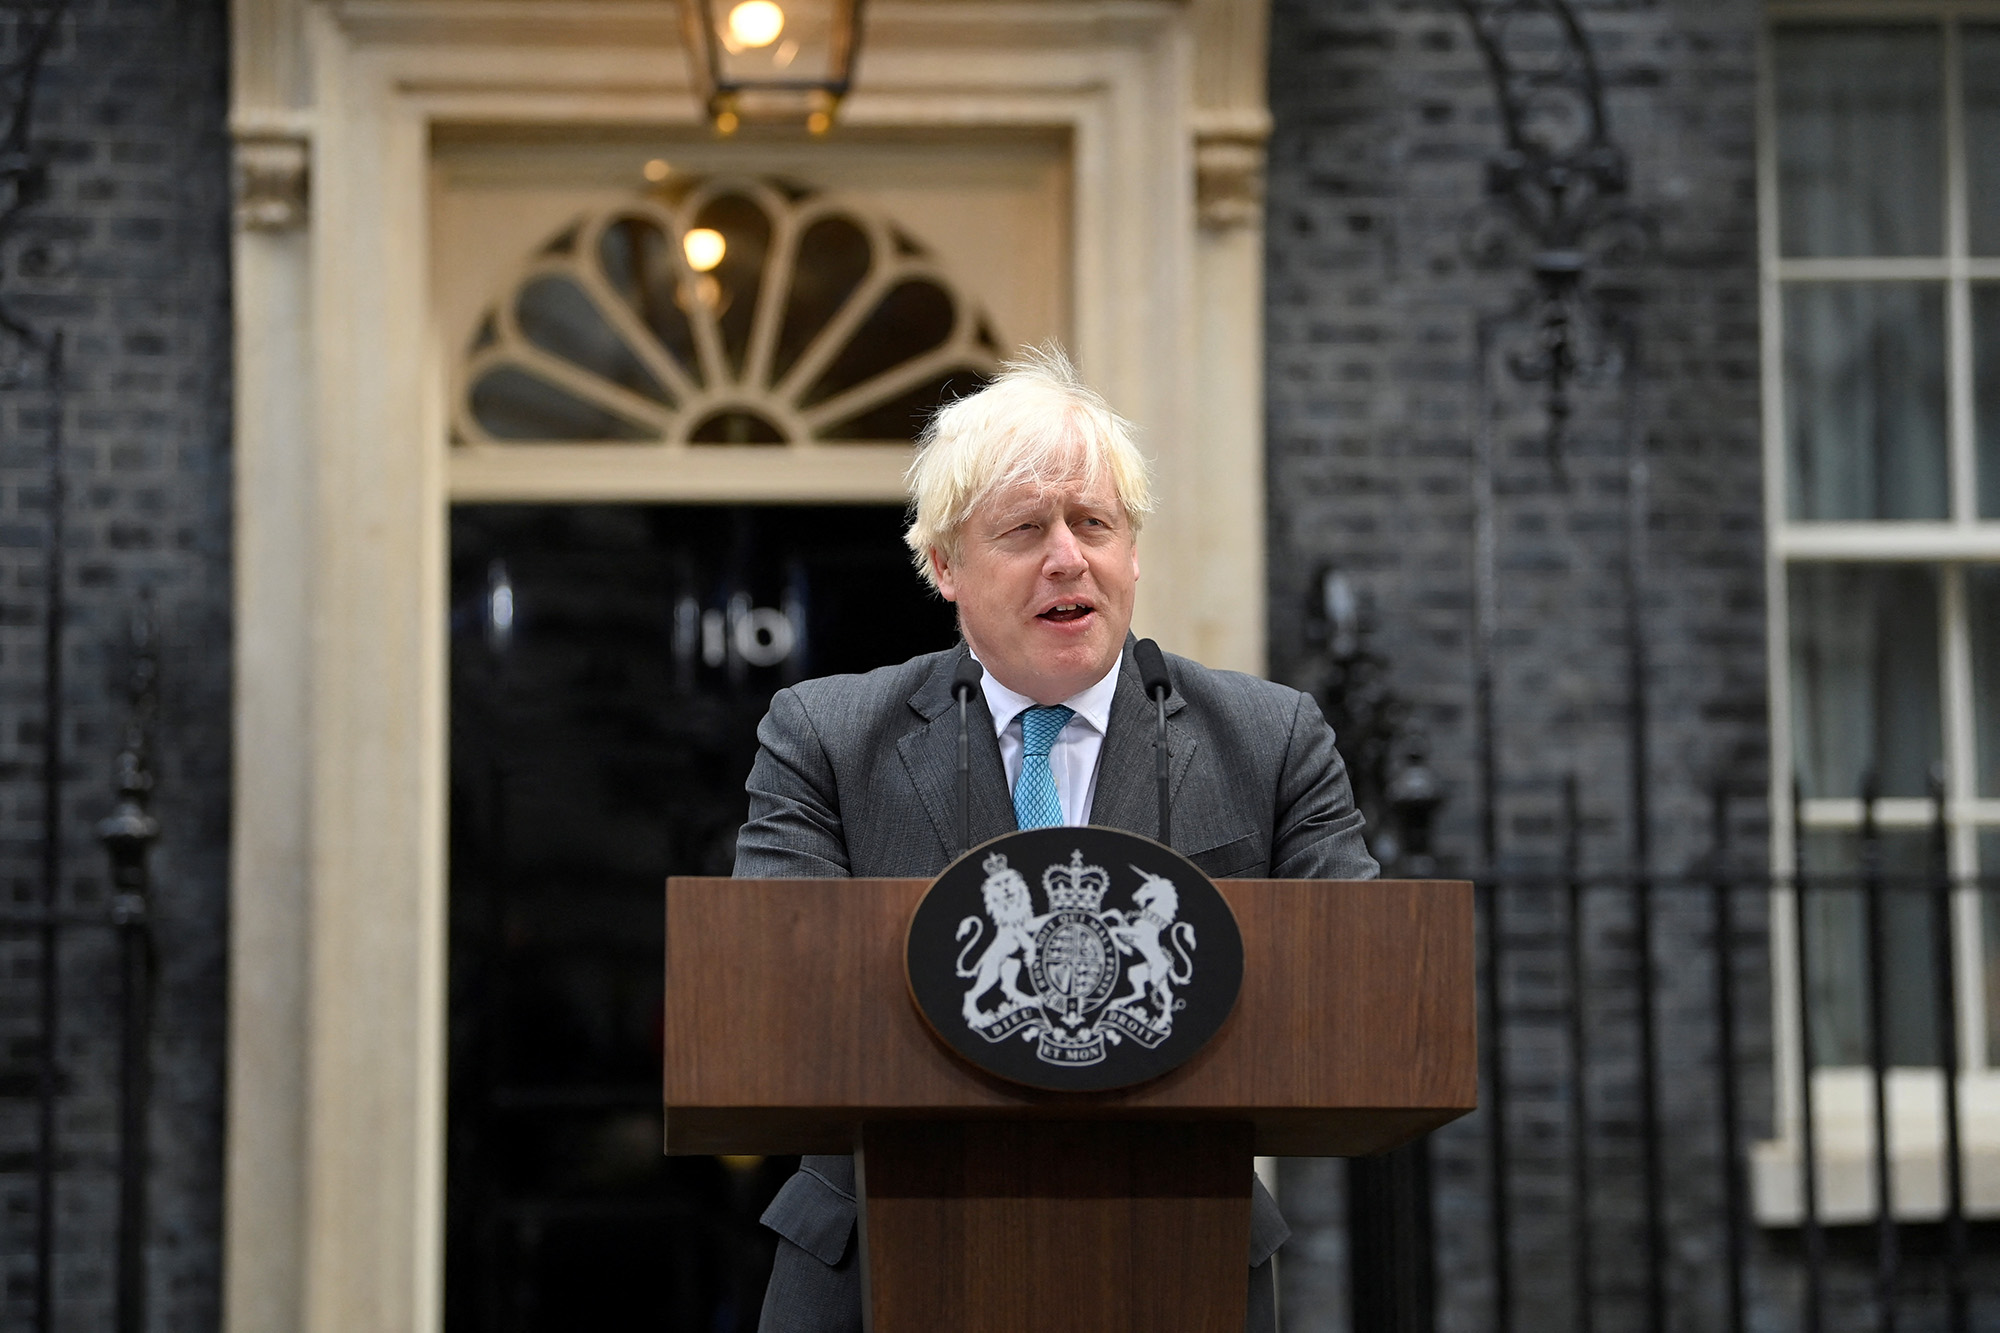 Outgoing British Prime Minister Boris Johnson delivers a speech on his last day in office, outside Downing Street, in London, England, on September 6.